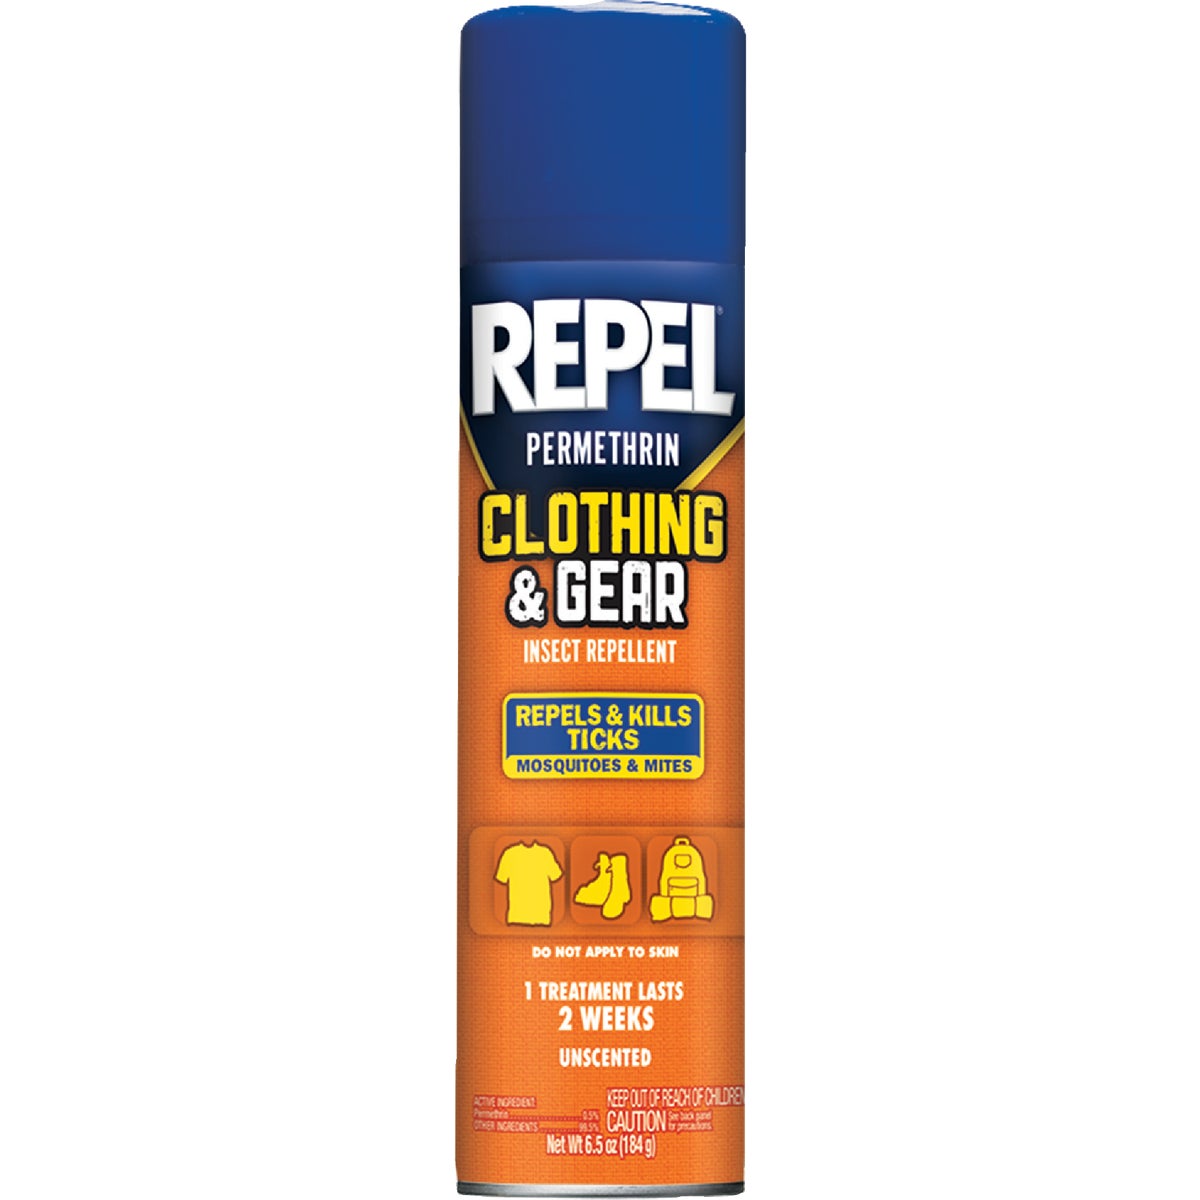 Item 700892, Clothing &amp; Gear insect repellent.